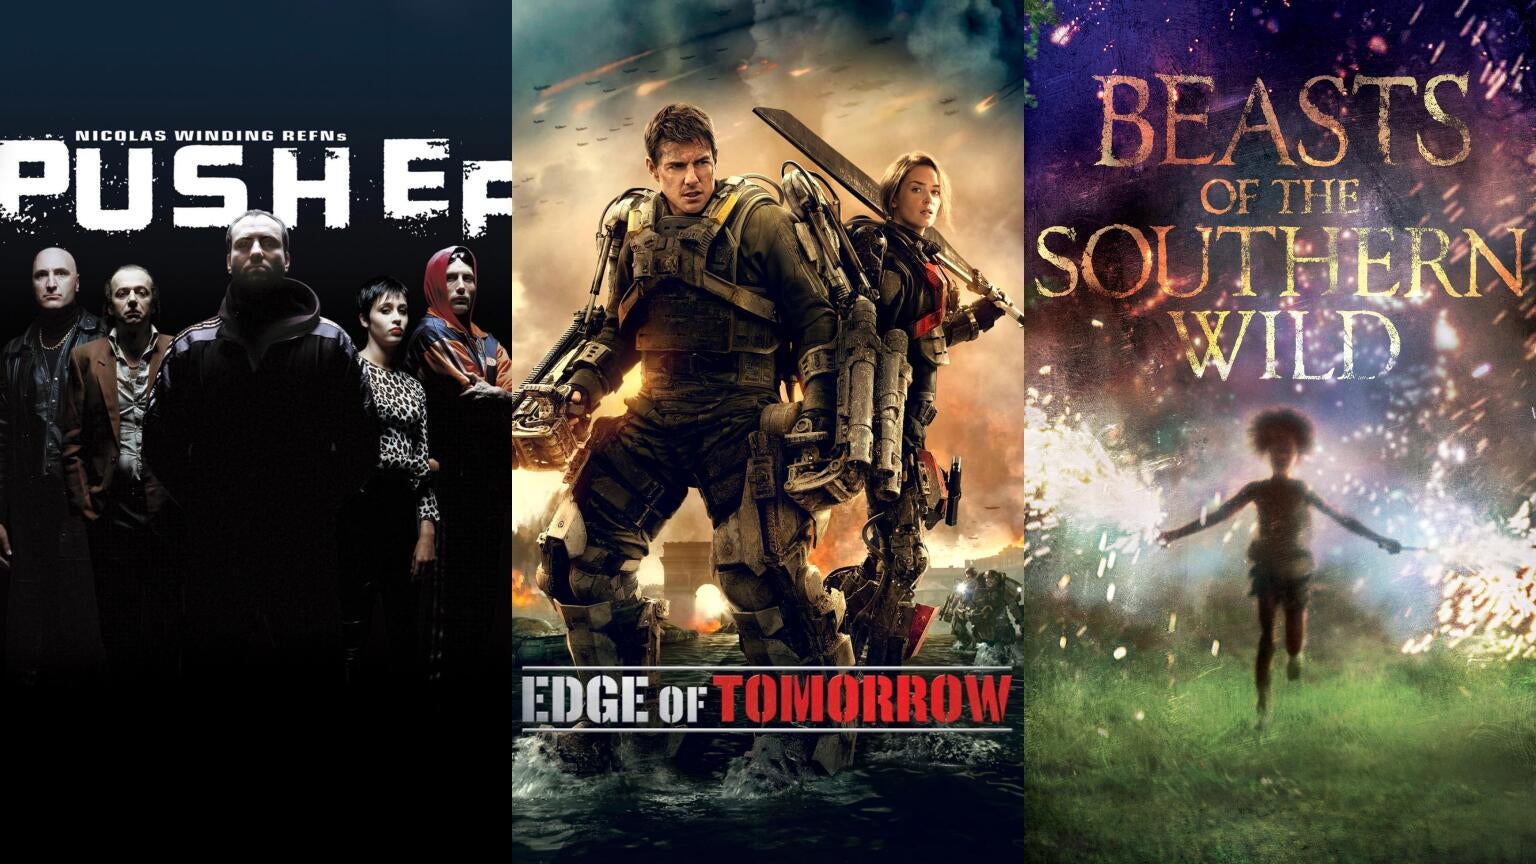 Movie posters for "Pusher," "Edge of Tomorrow," and "Beasts of the Southern Wild"